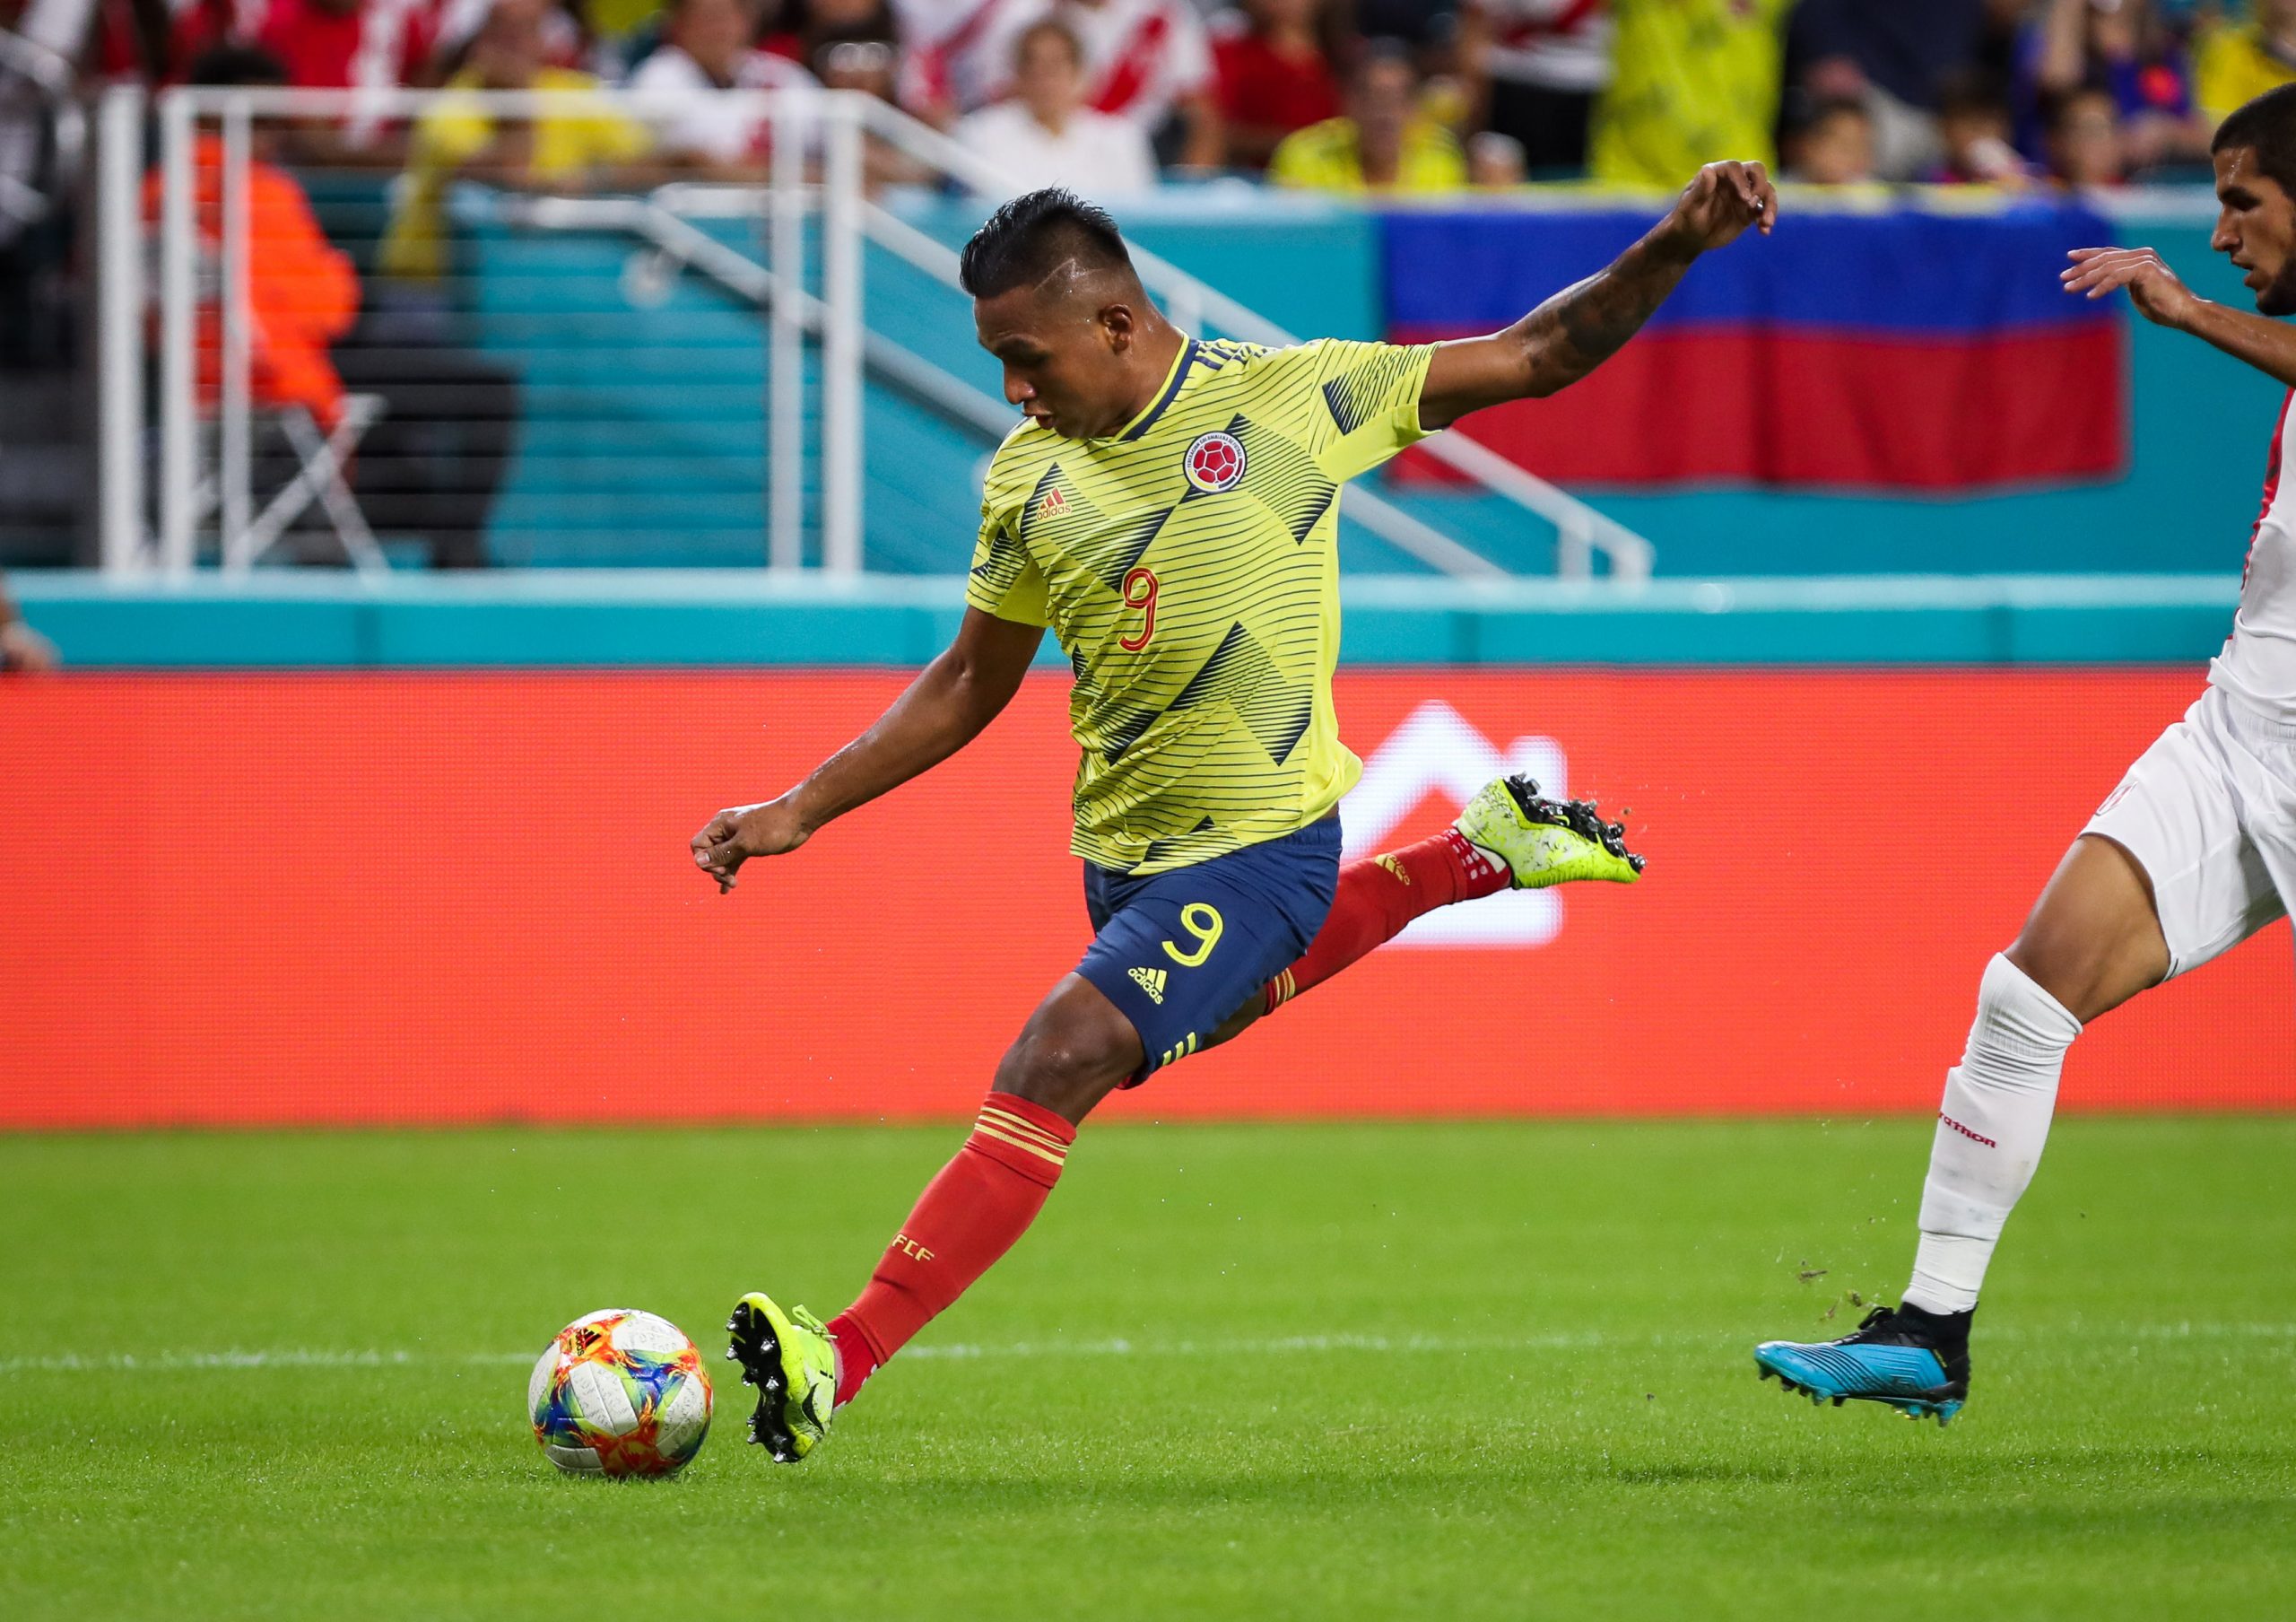 Morelos overlooked for Colombia